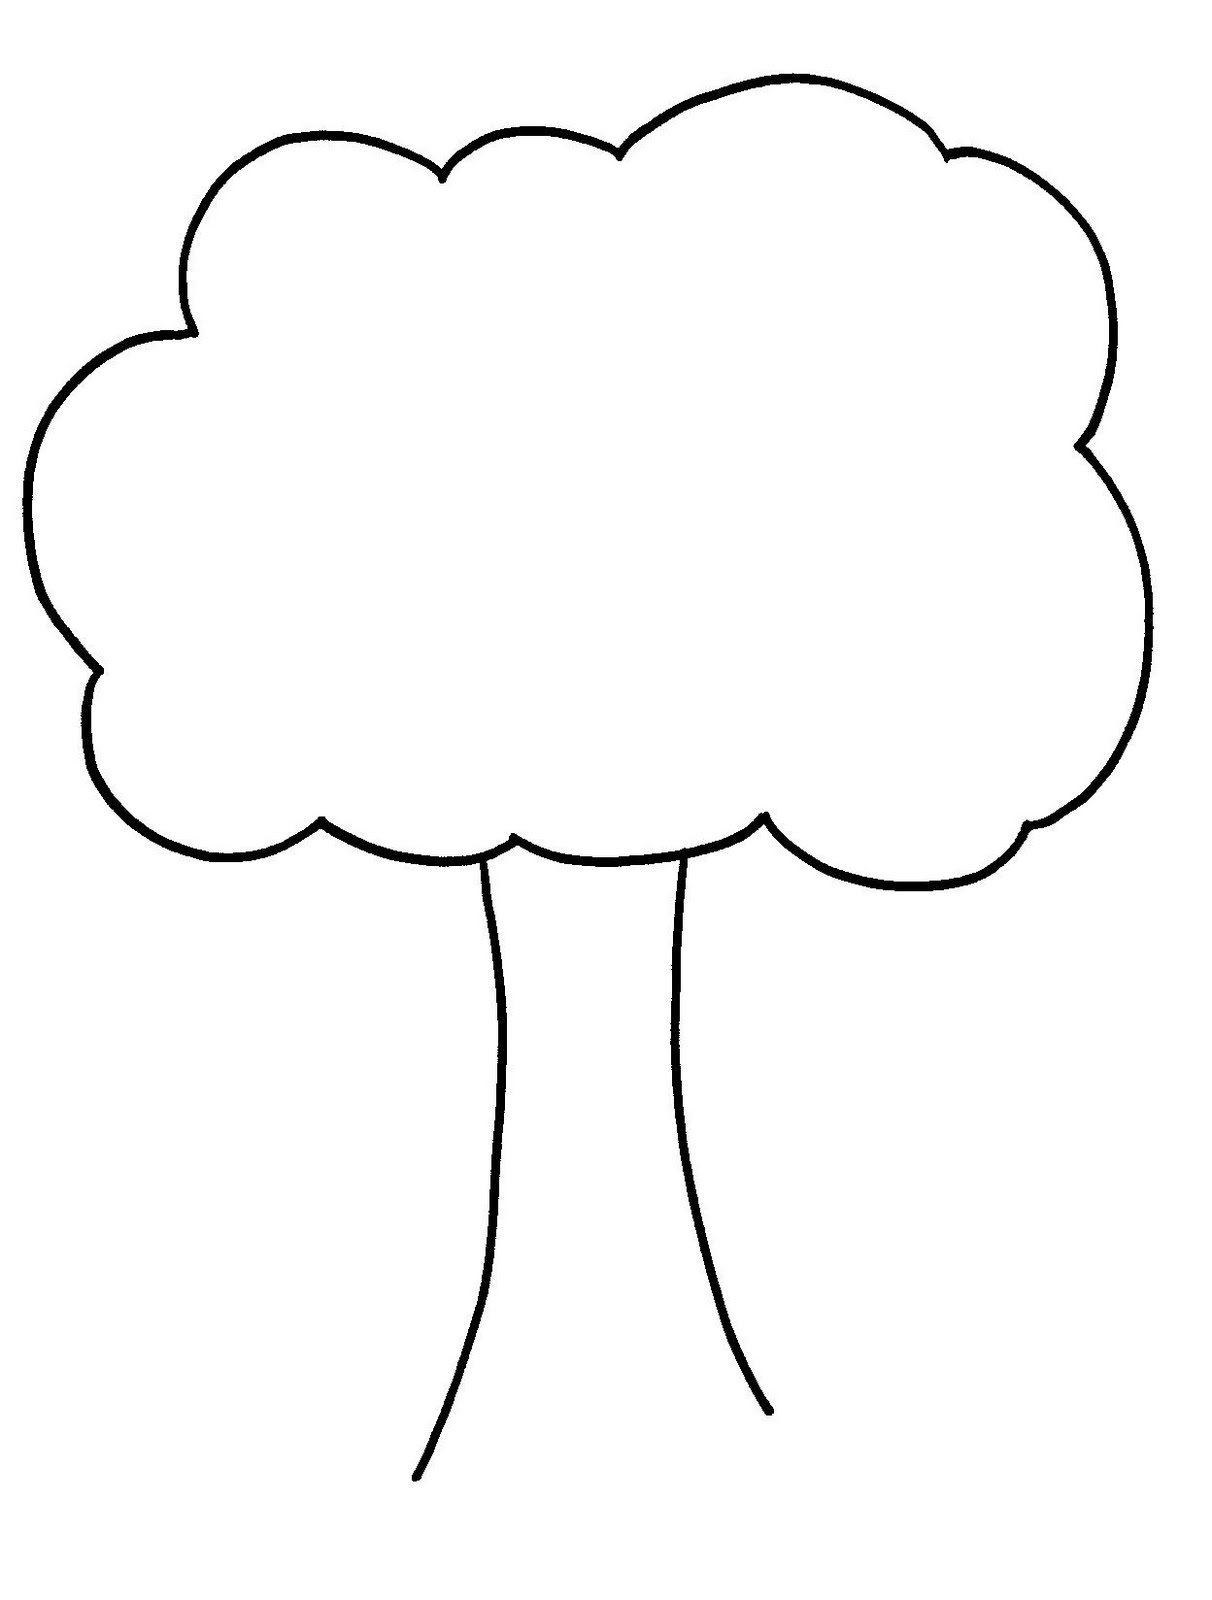 Apple tree clipart outline